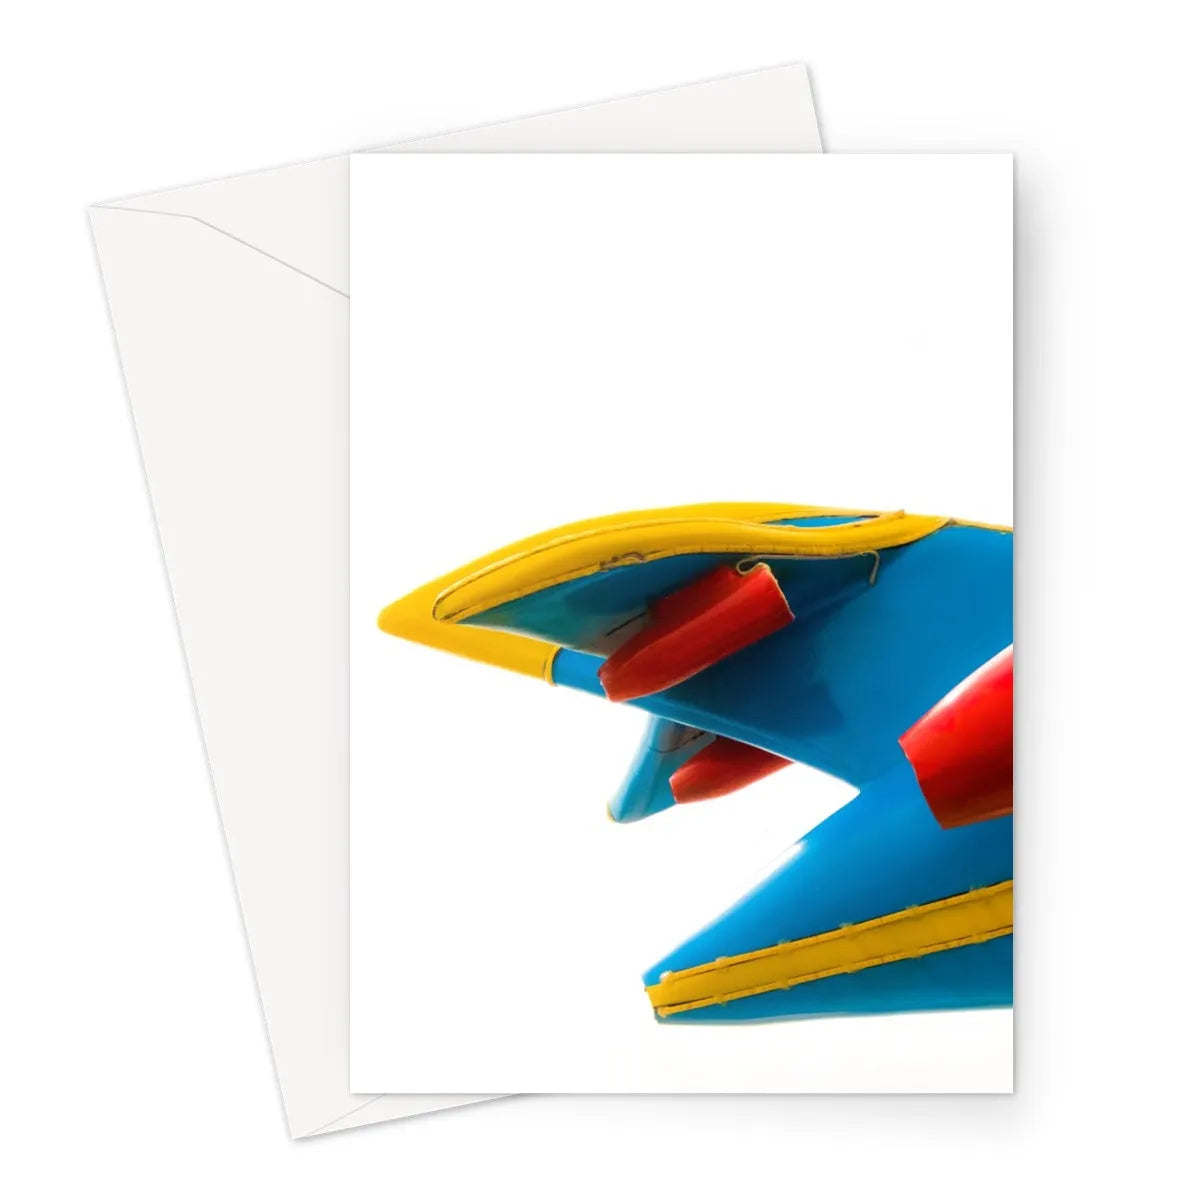 Flying Higher Greeting Card - A5 Portrait / 1 Card - Greeting & Note Cards - Aesthetic Art